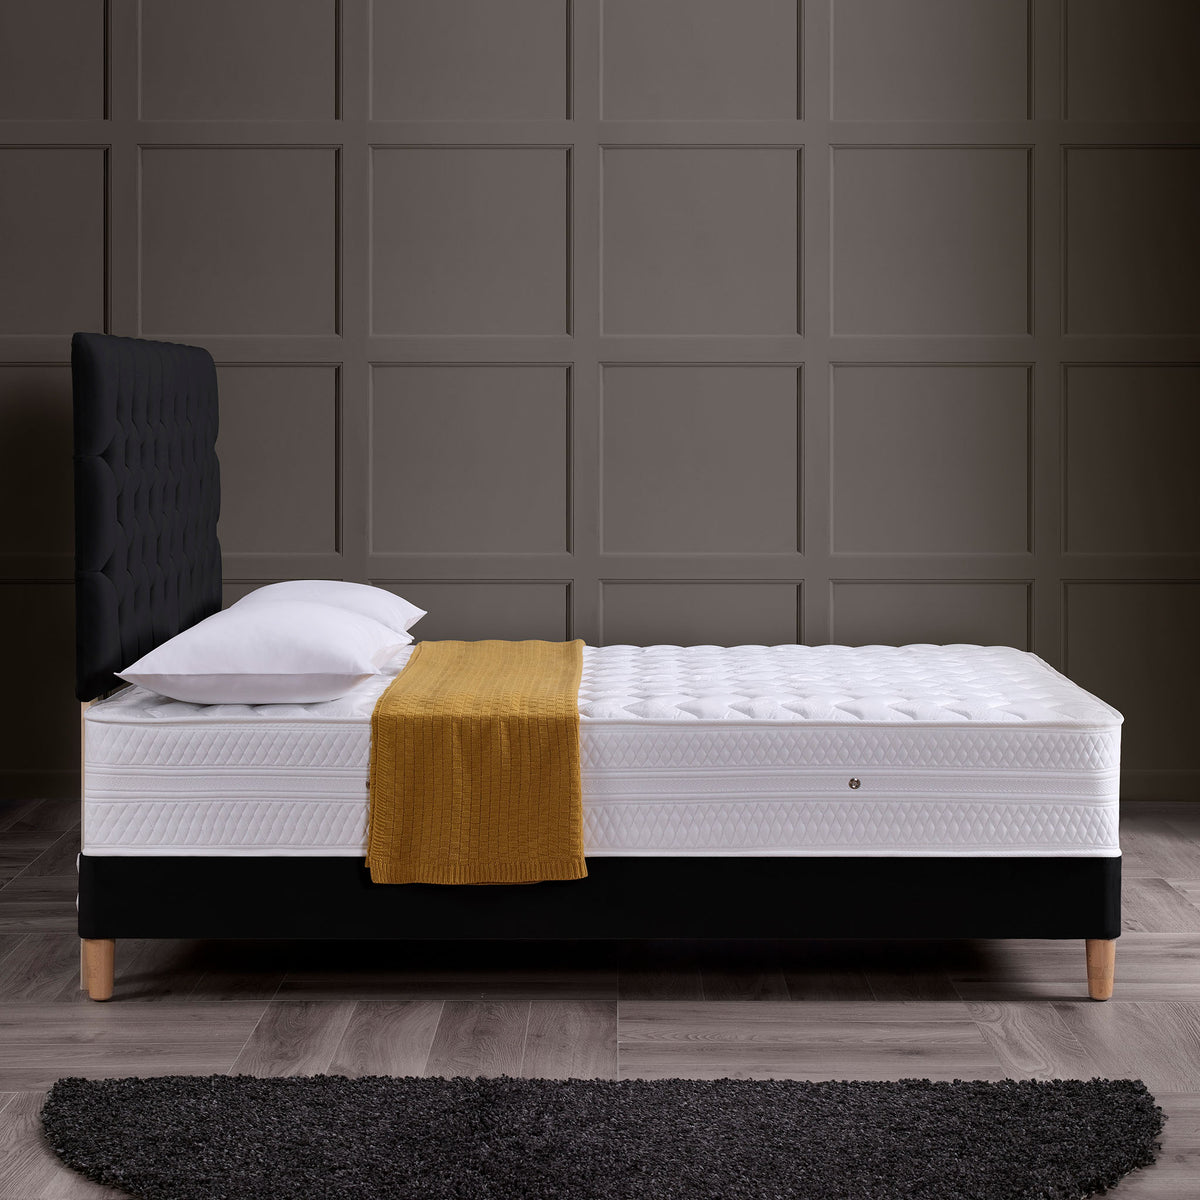 Cheshire Support Mattress by Roseland Sleep side lifestyle image